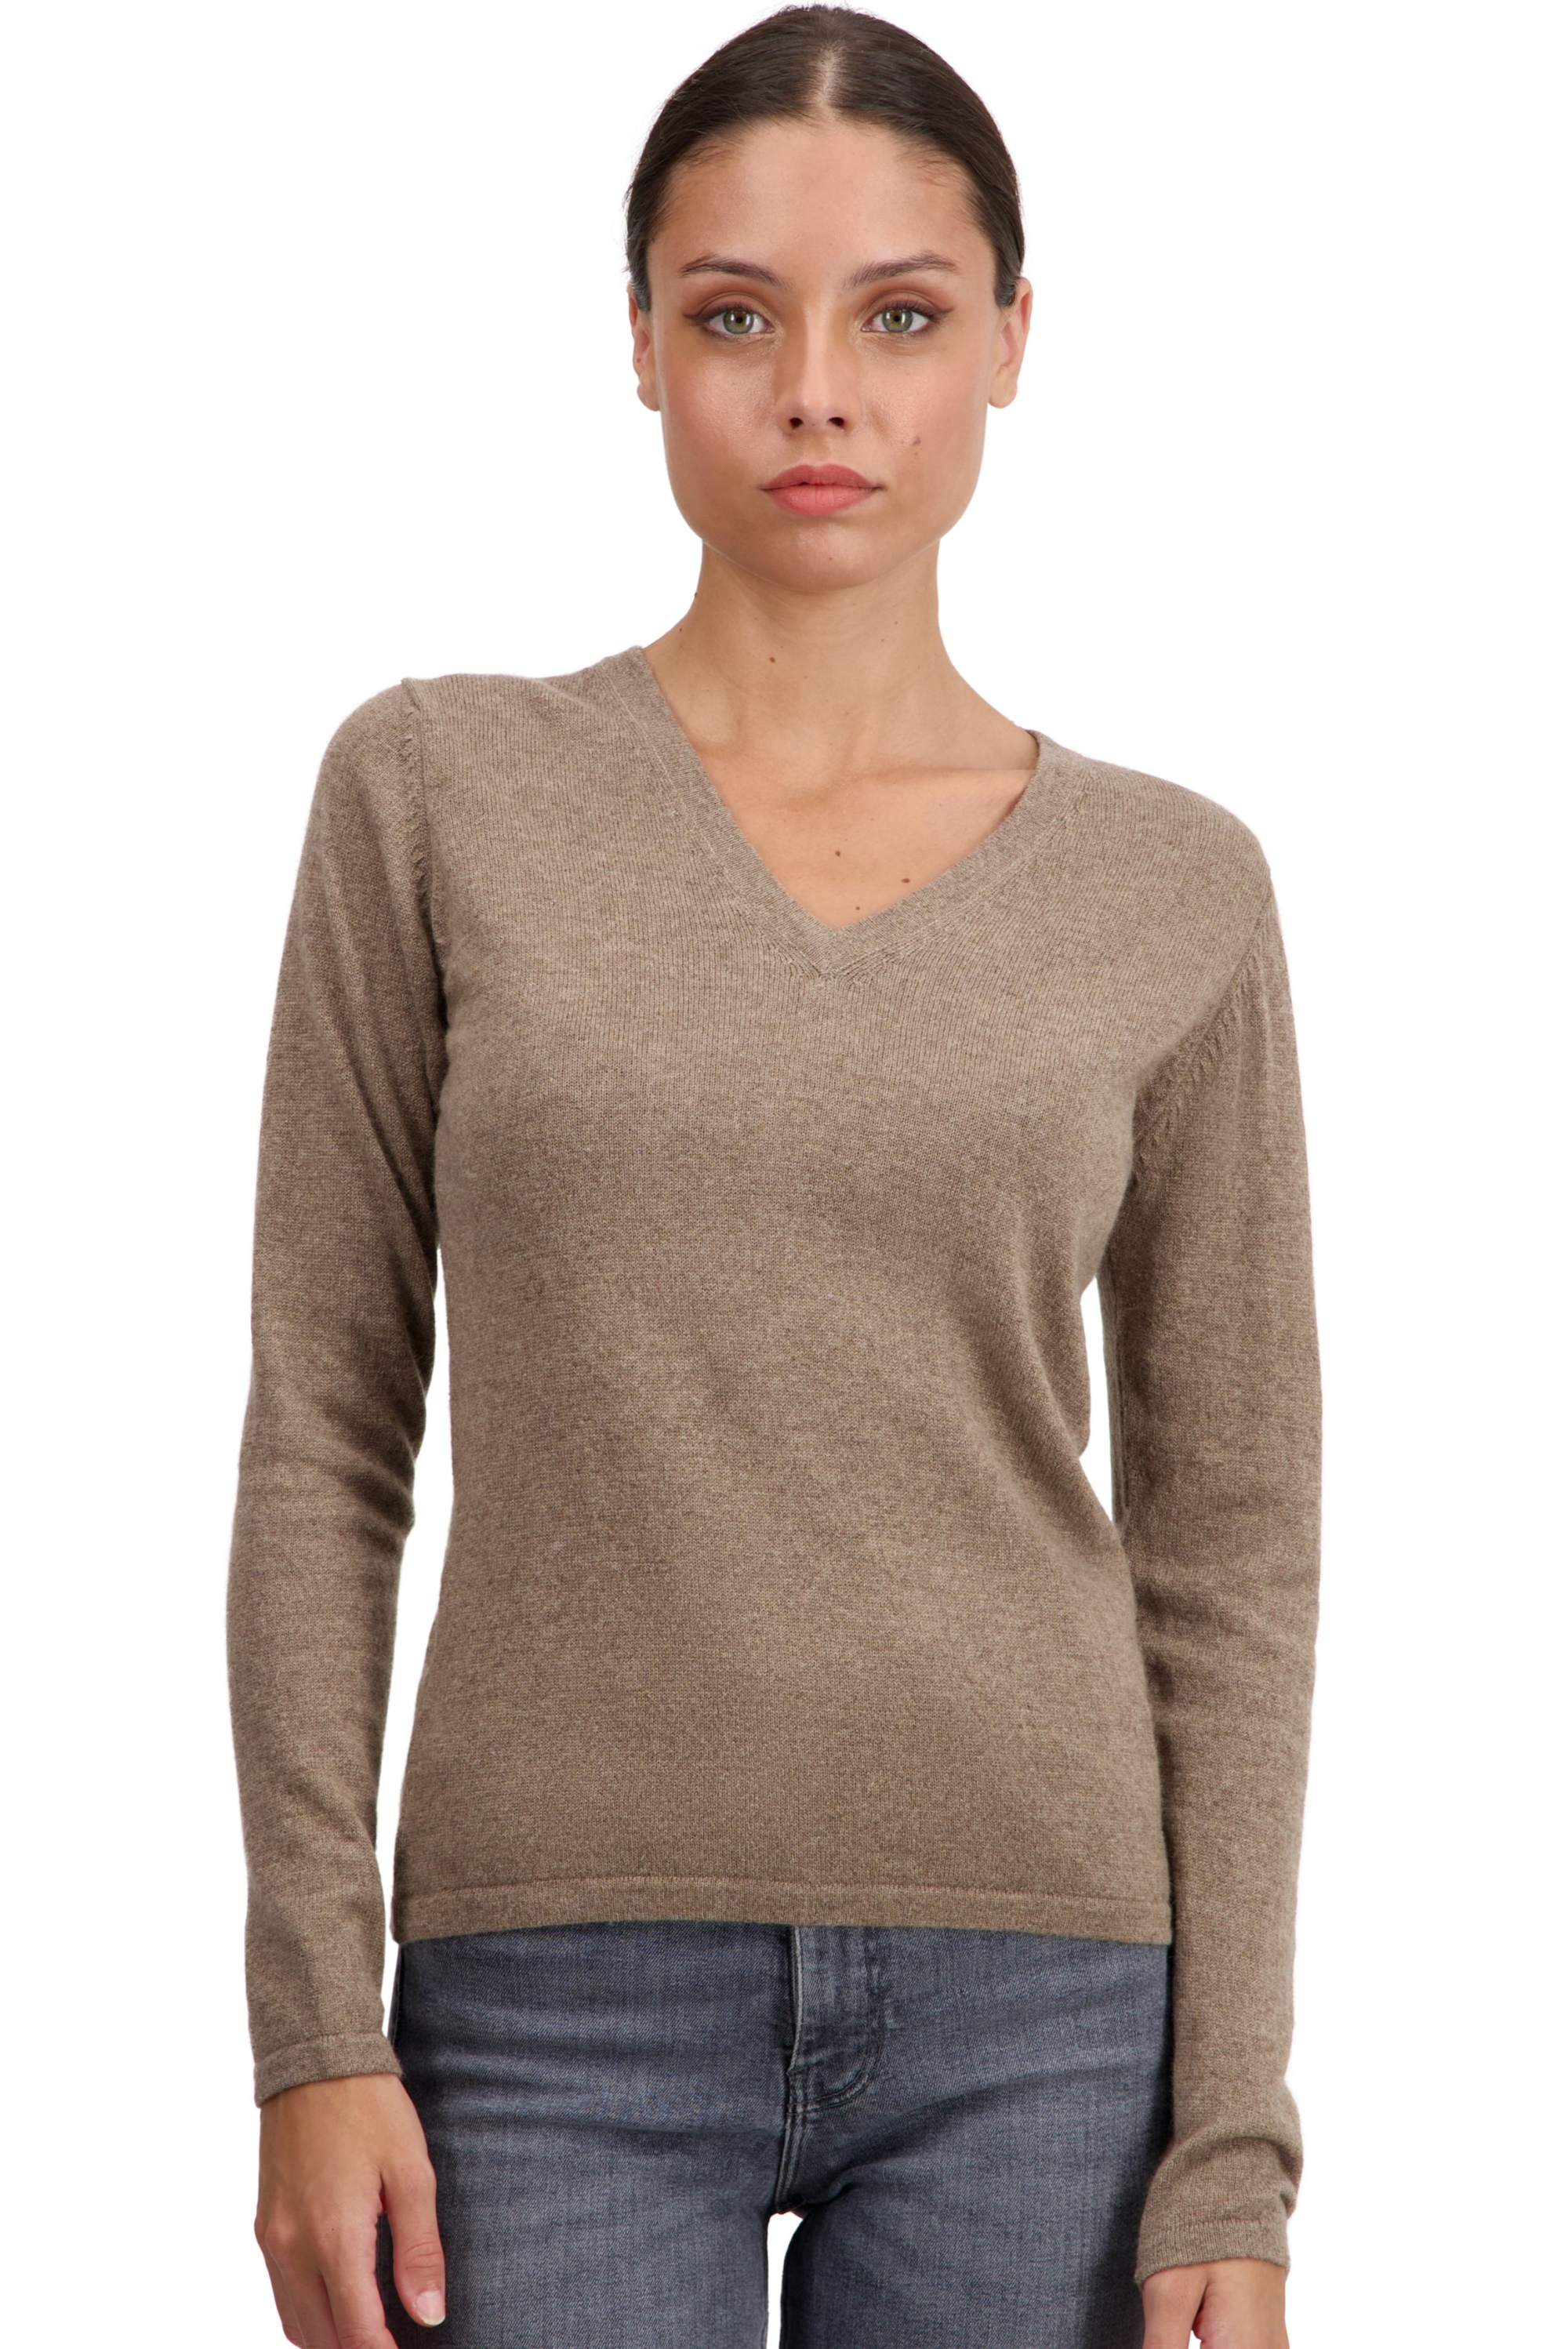 Cashmere ladies spring summer collection emma natural terra s